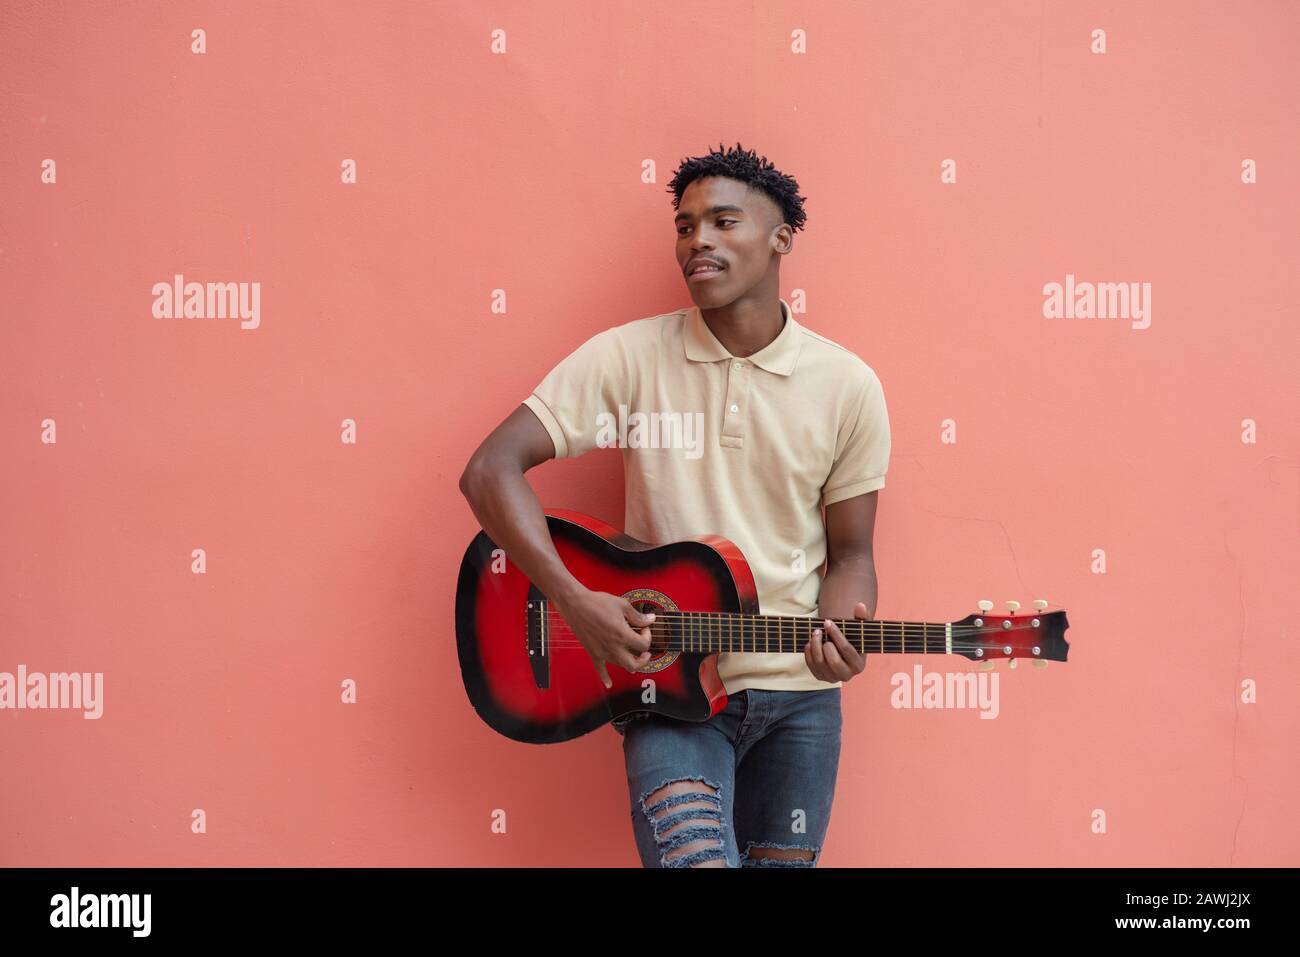 Young man with guitar standing against bright colored wall while performing Stock Photo